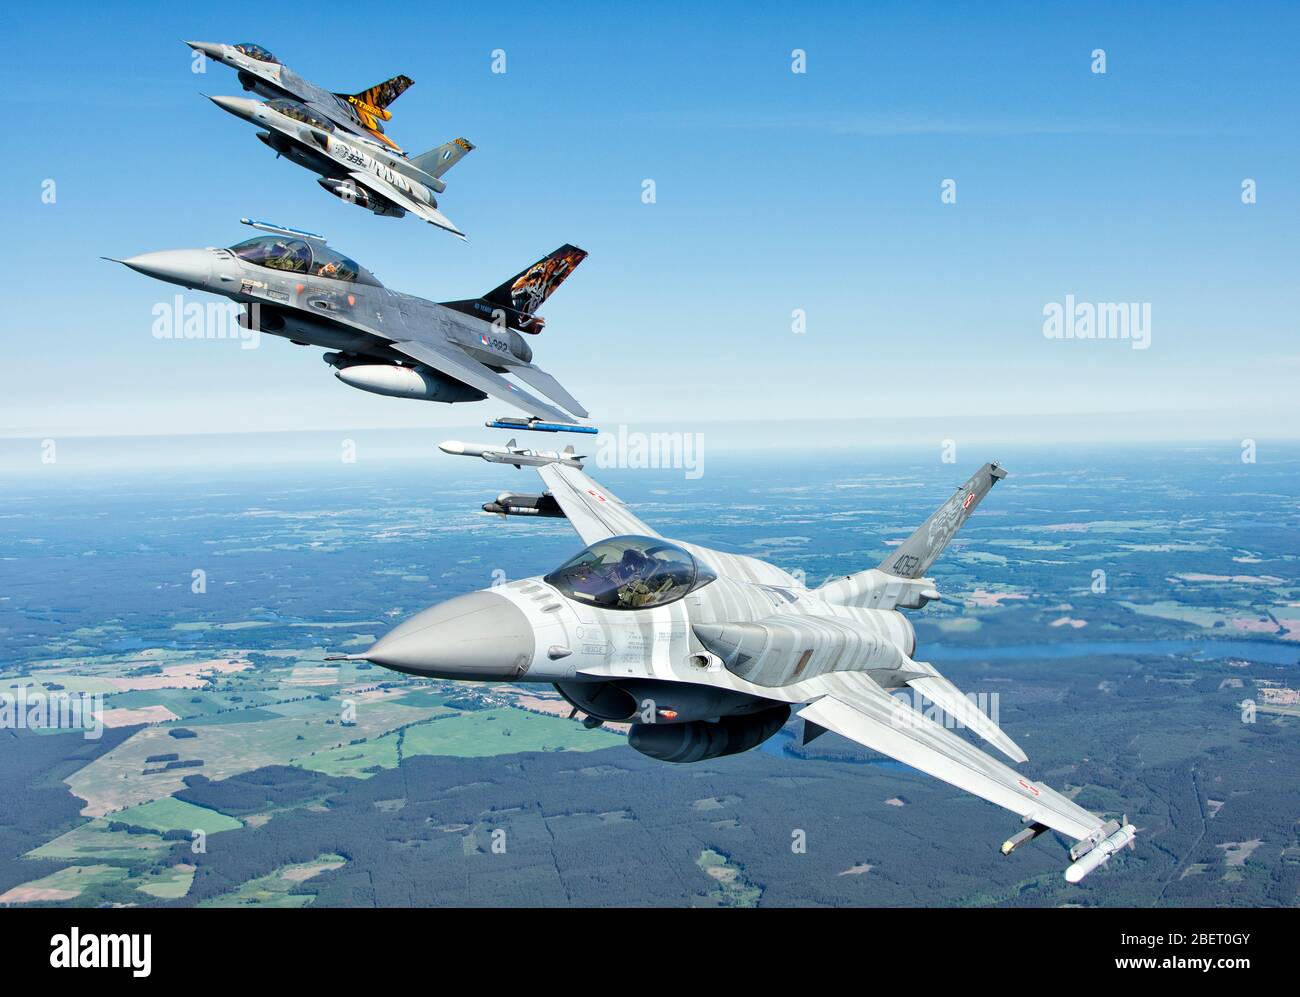 Mix formation of F-16 aircraft during Exercise NATO Tiger Meet Stock Photo  - Alamy